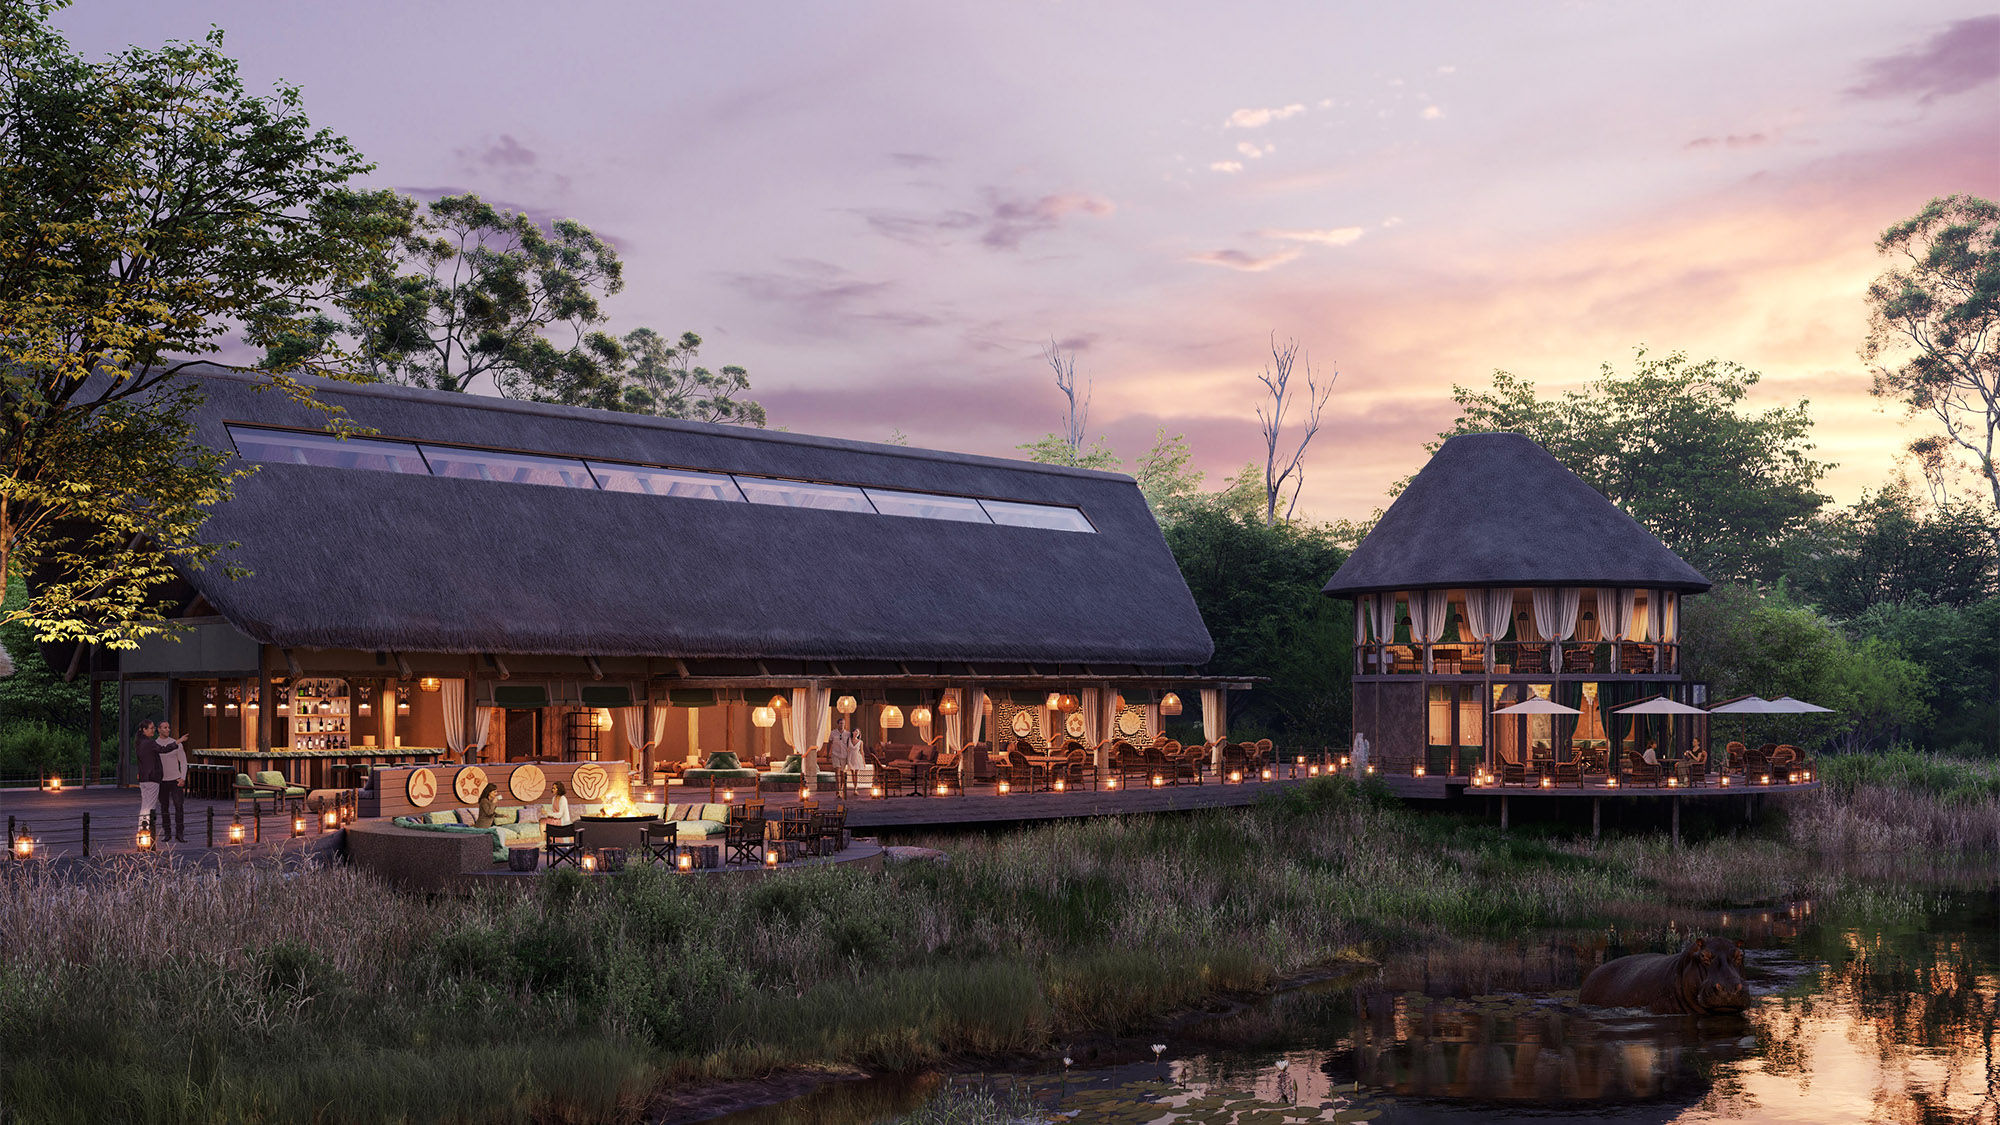 The lodge at the Atzaro Okavango camp, seen here in a rendering, will house a restaurant, bar, African art gallery, art shop and wine cellar.